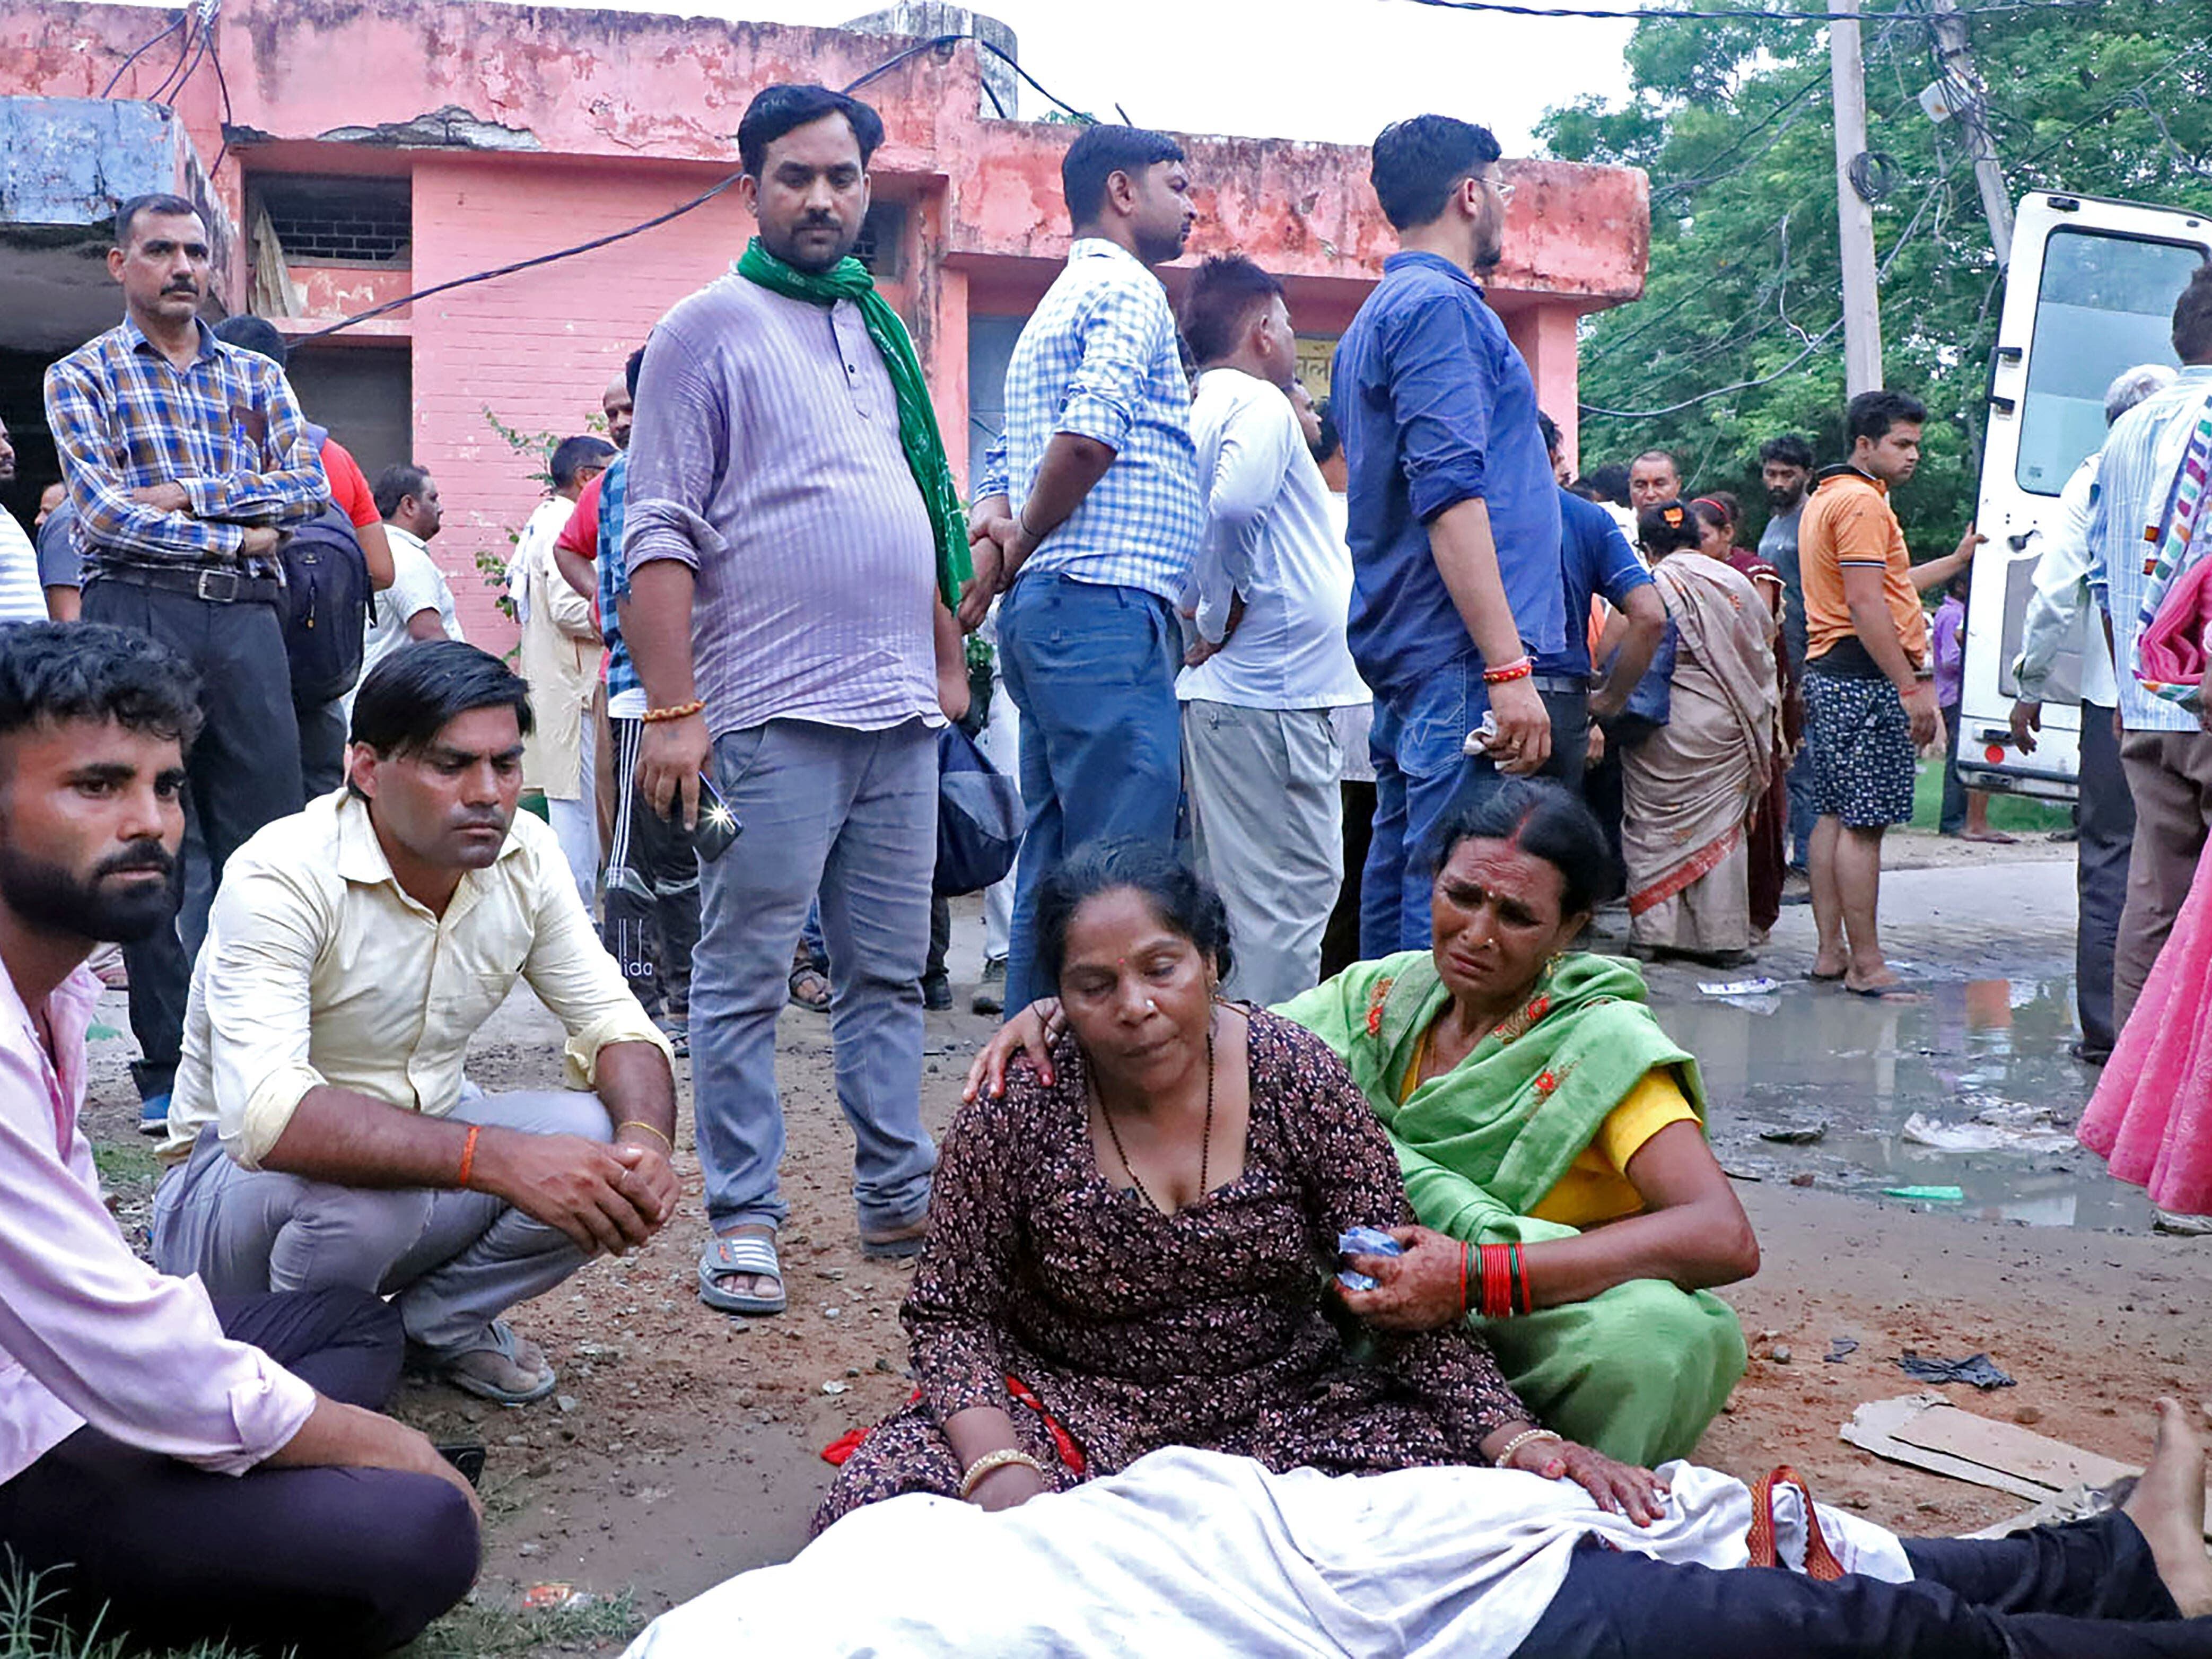 At least 105 people killed in stampede at religious event in India